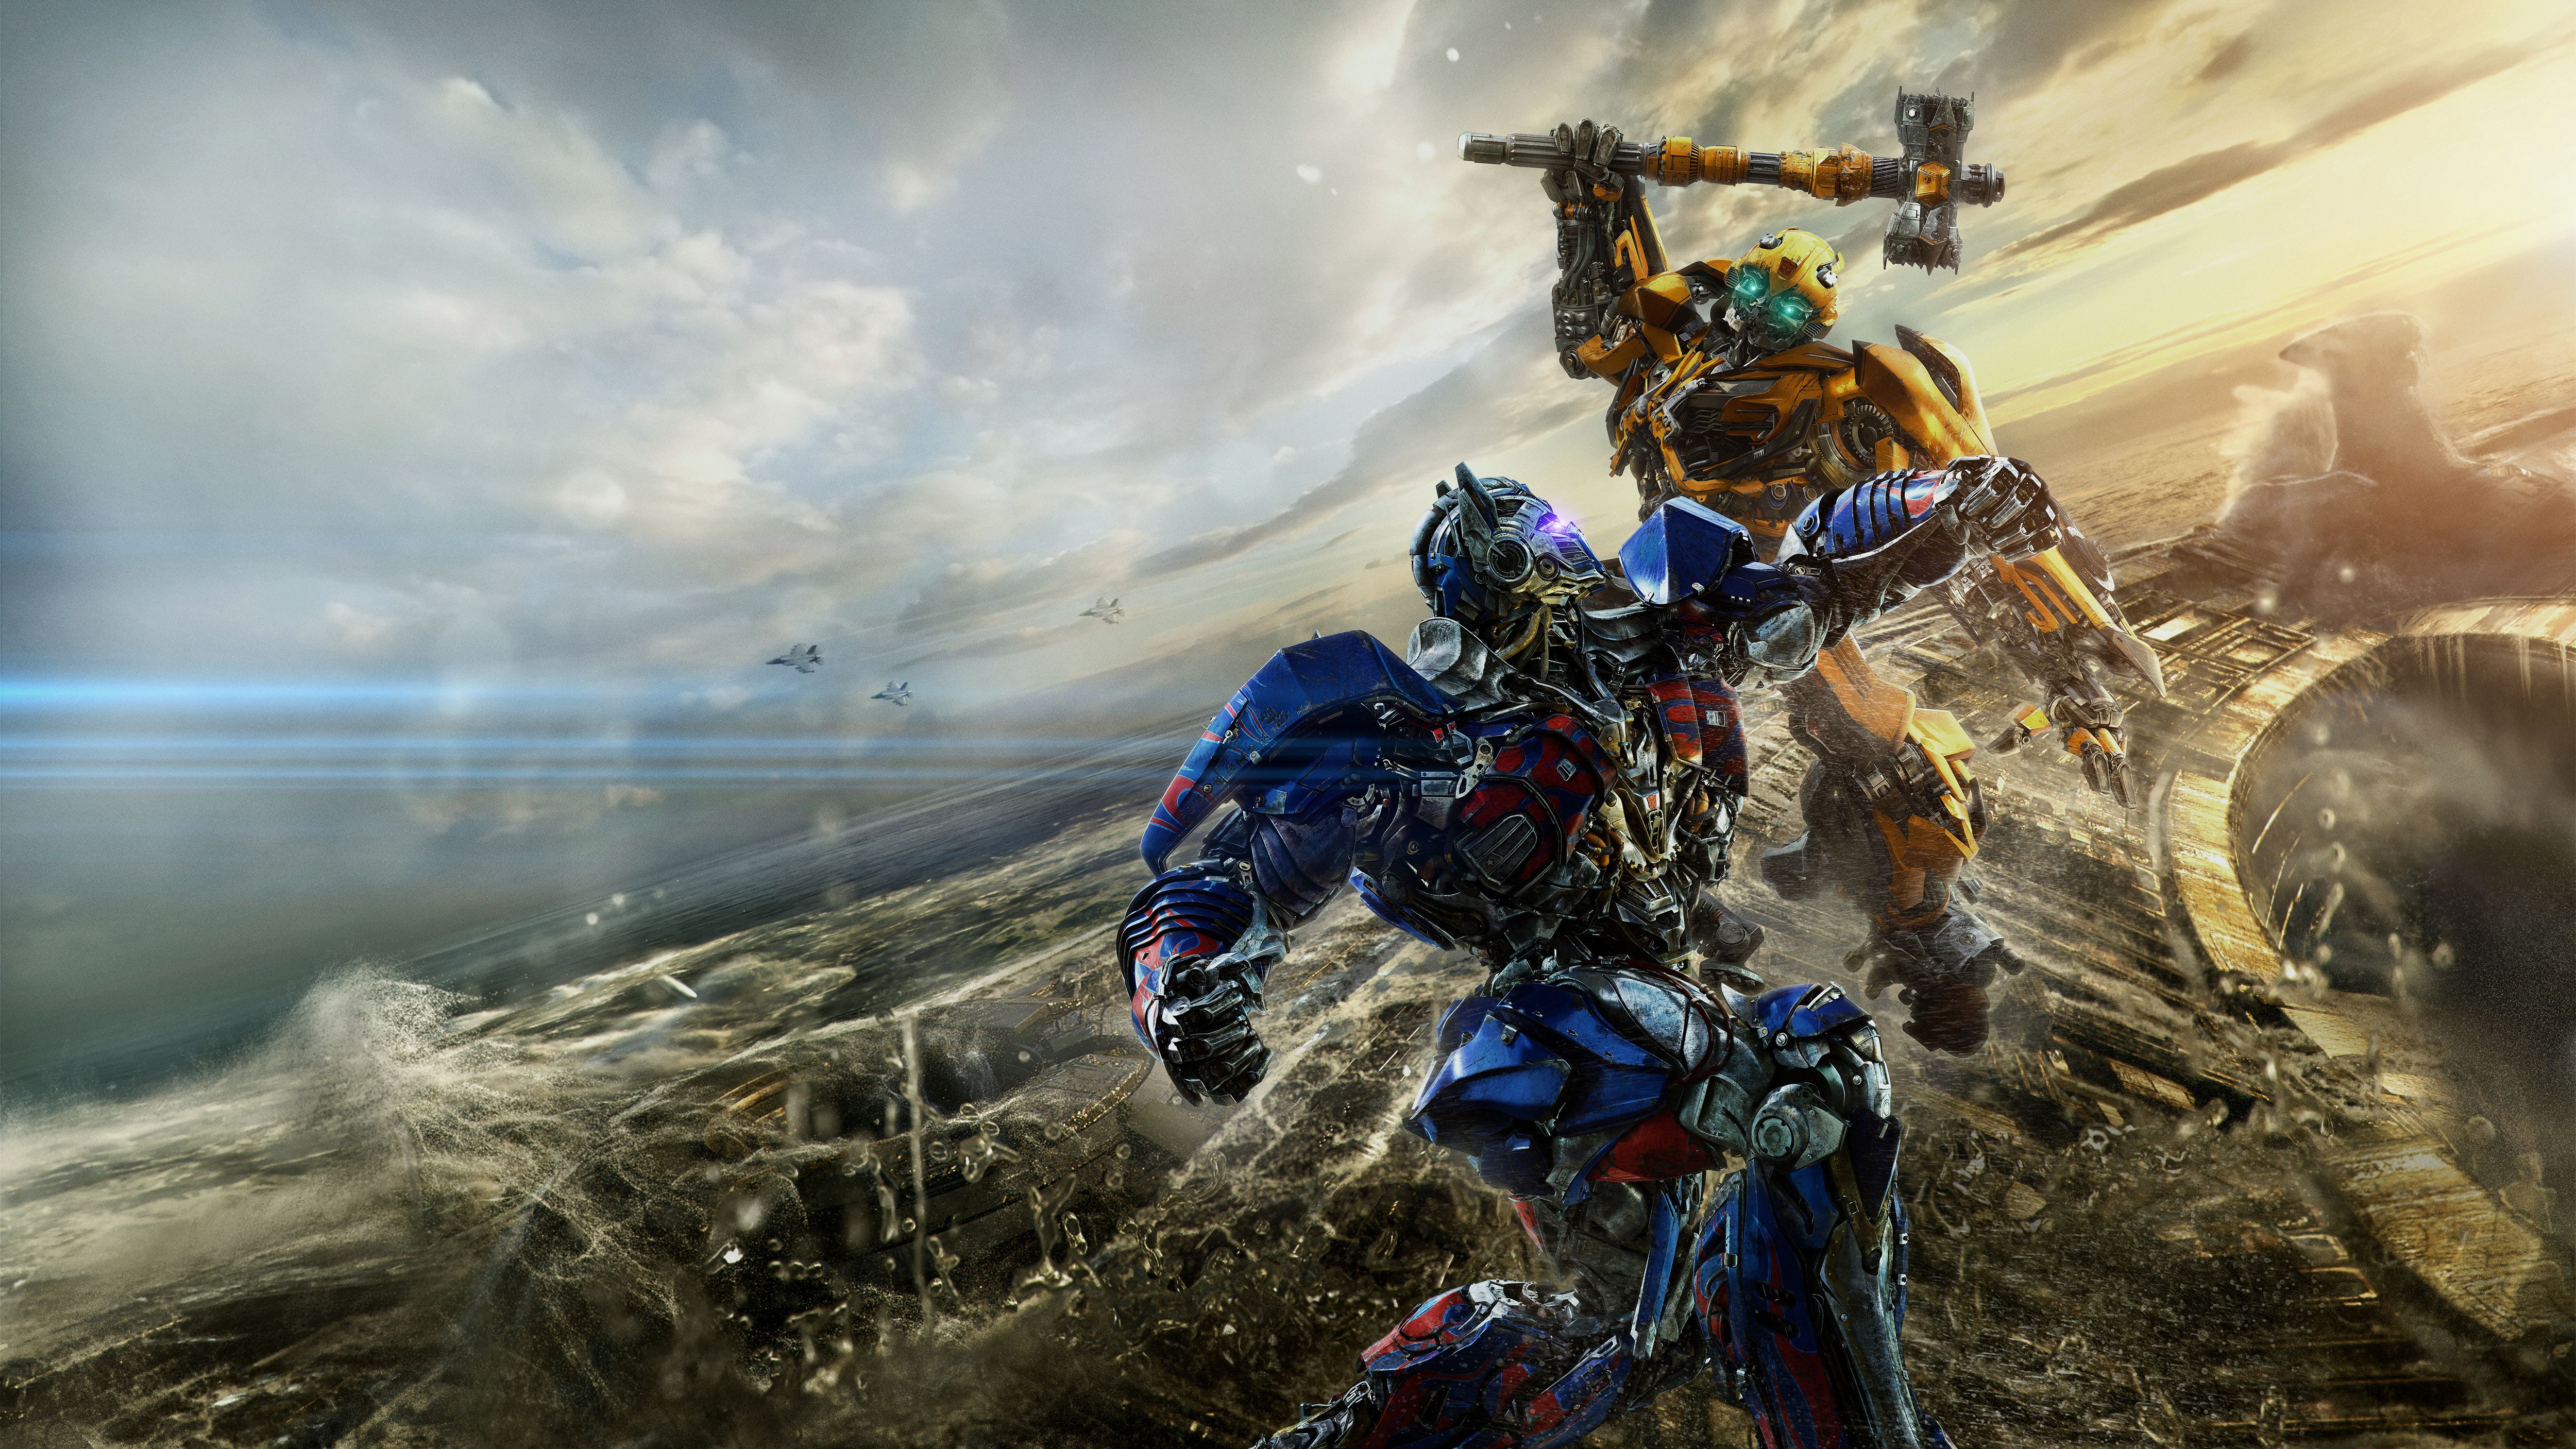 K, #Fight, #Transformers: The Last Knight, #Bumblebee